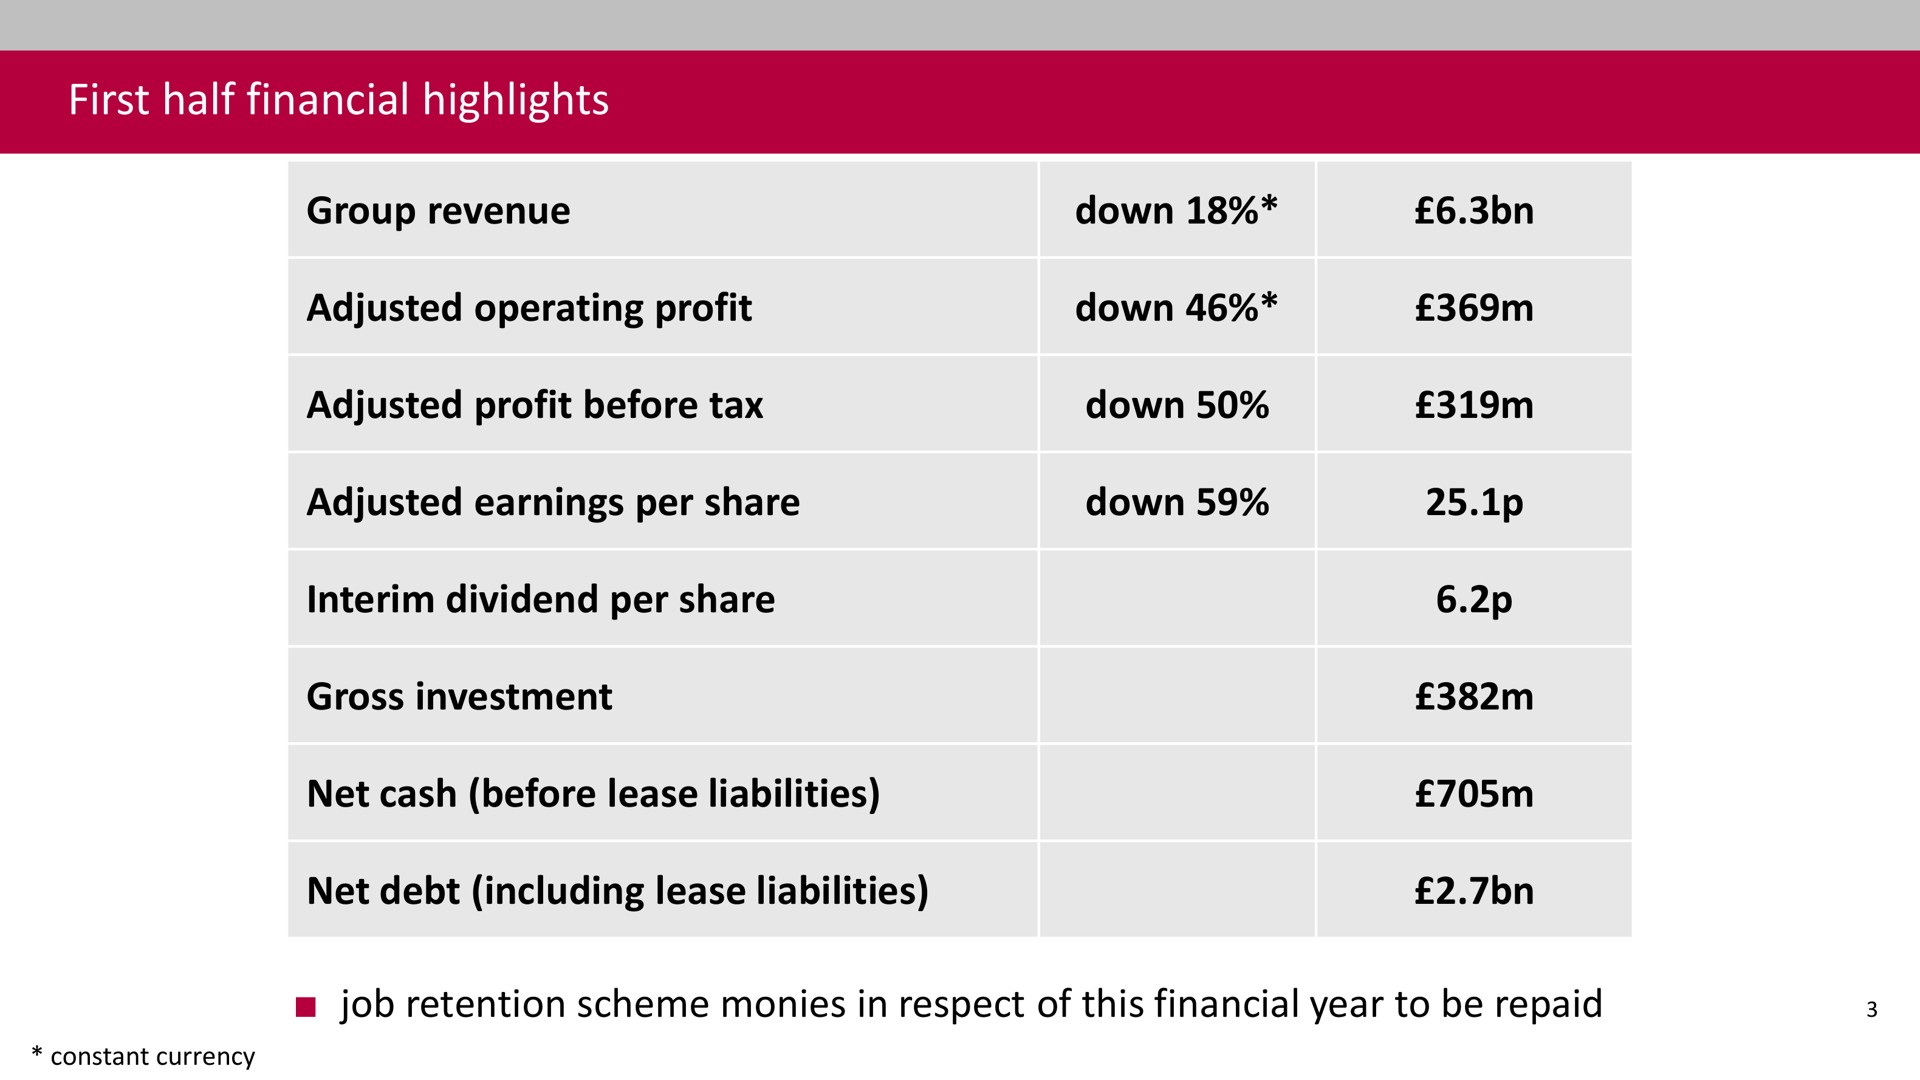 first half financial highlights group revenue down adjusted operating profit down adjusted profit before tax down adjusted earnings per share down interim dividend per share gross investment net cash before lease liabilities net debt including lease liabilities job retention scheme in respect of this financial year to be repaid | Associated British Foods